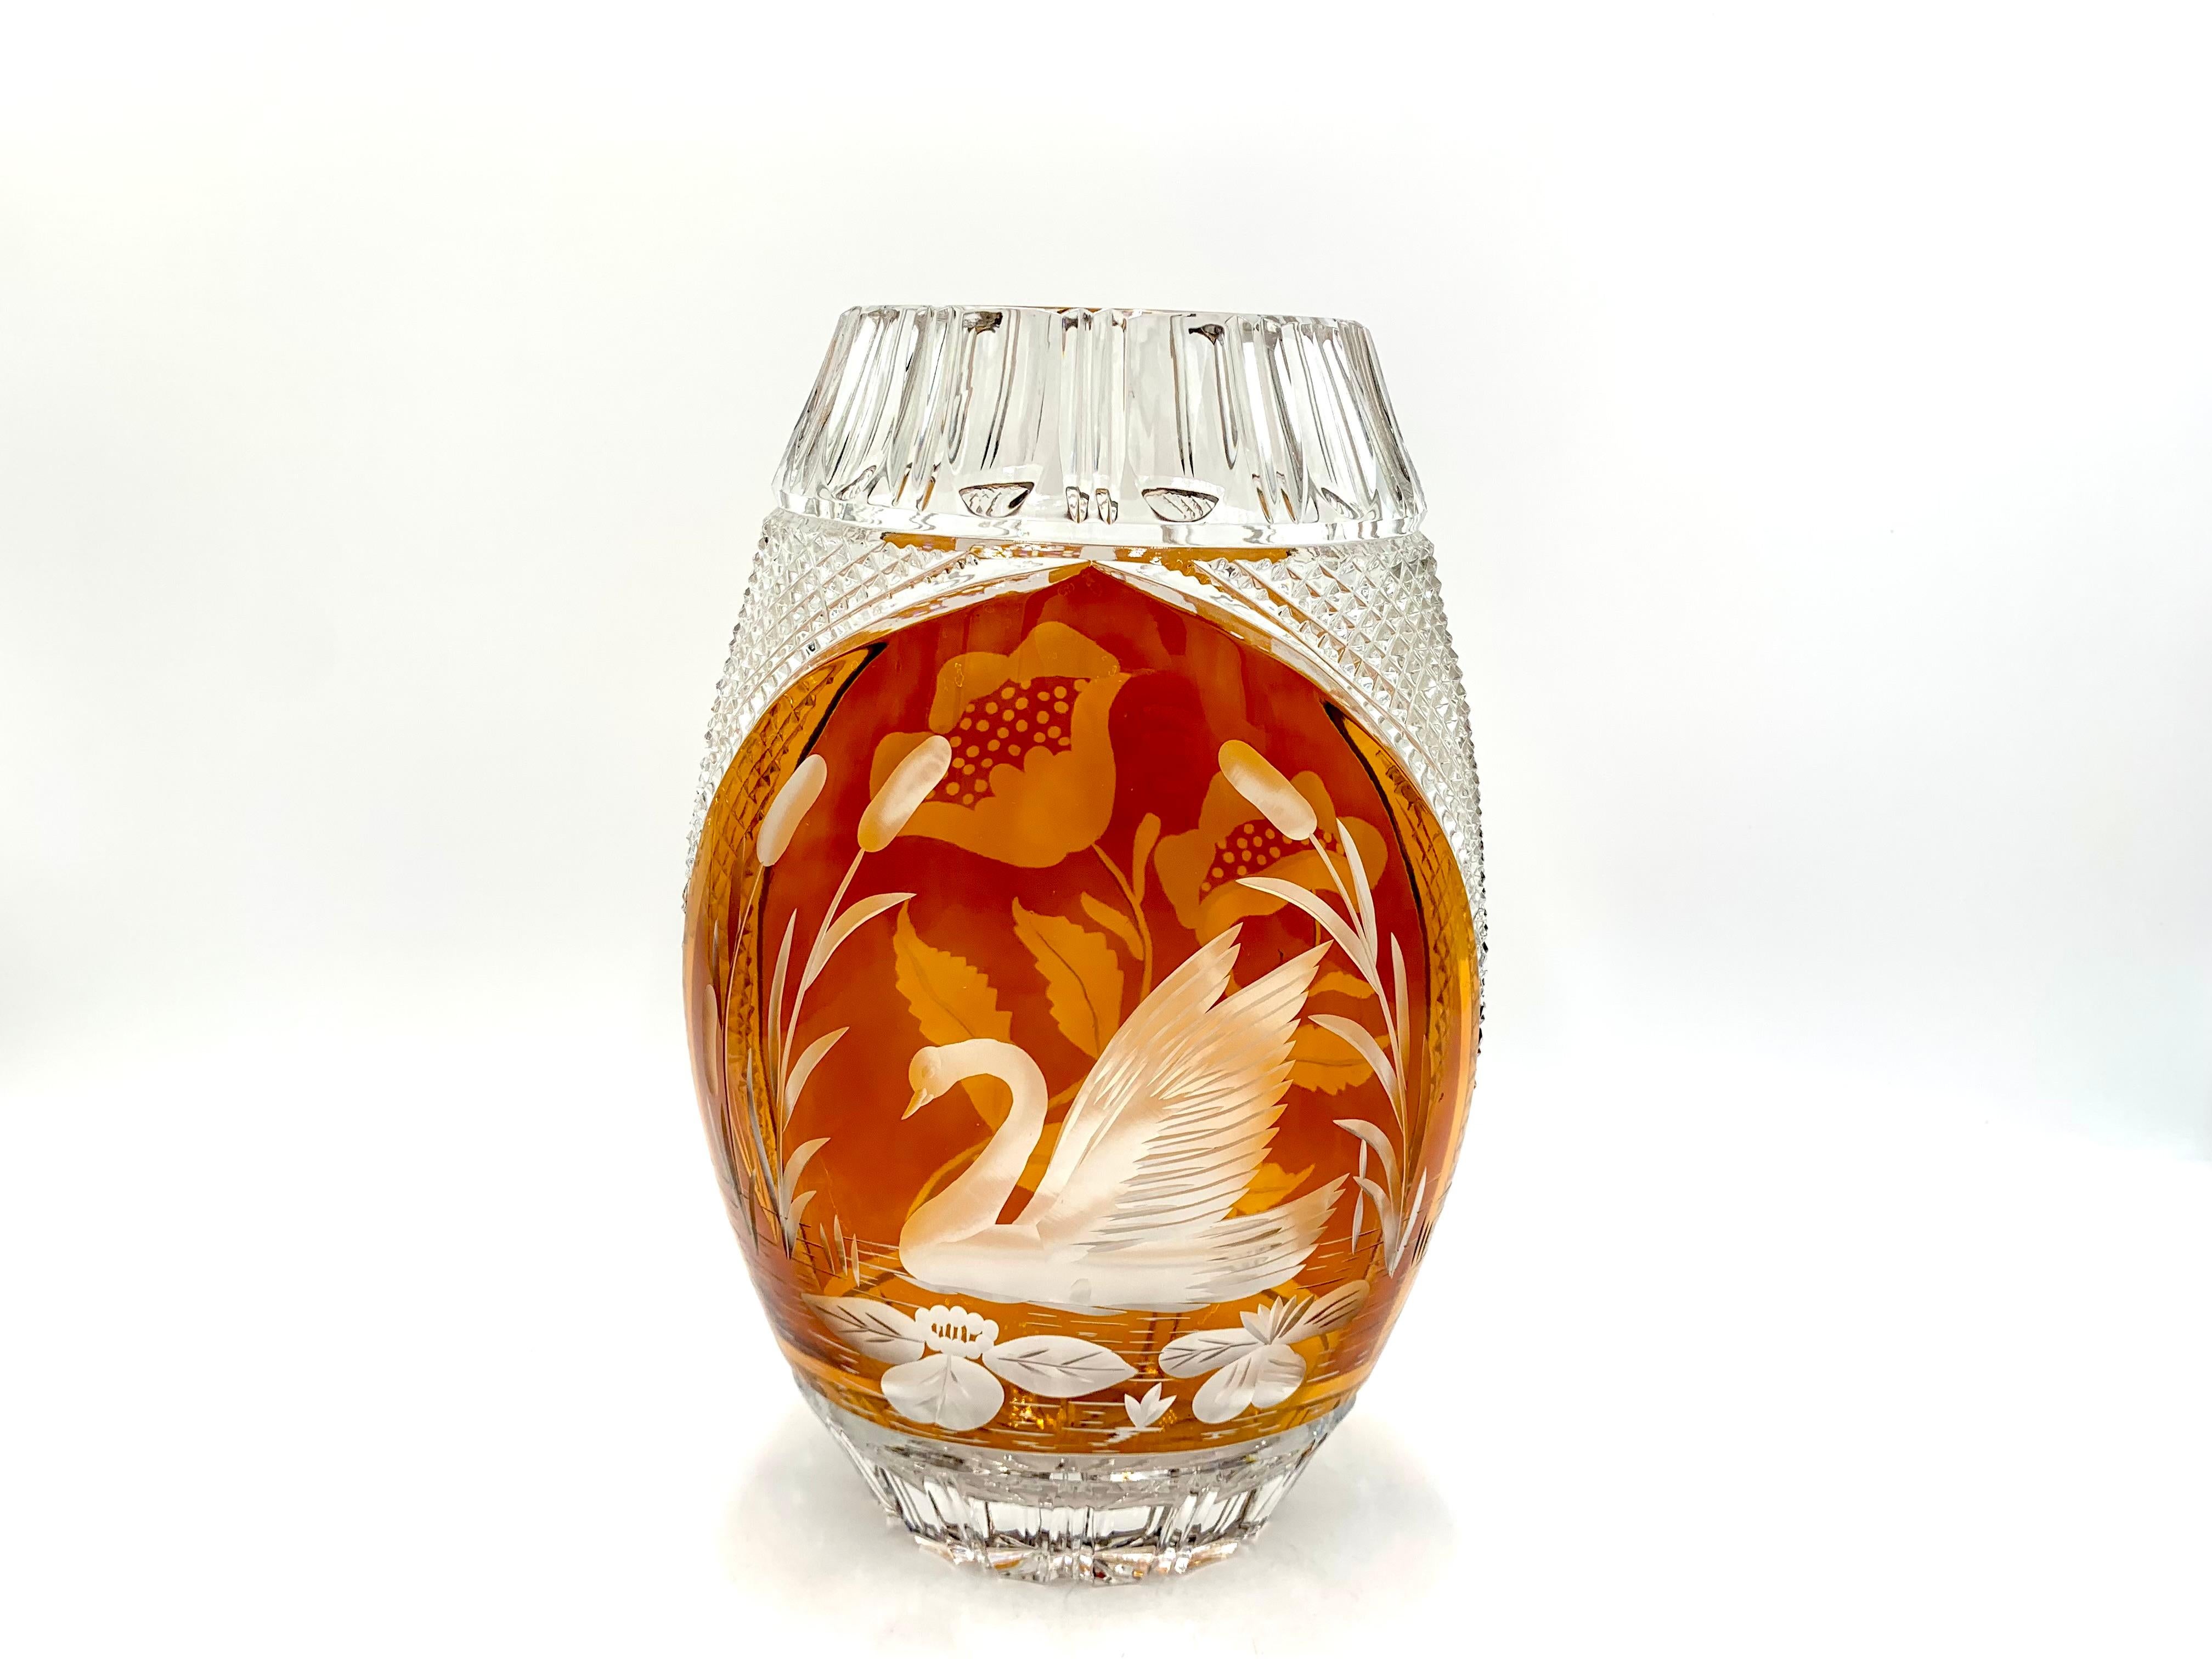 Crystal vase with honey glass and pattern. Produced in Poland by the Julia Glassworks in the 1960s.

Very good condition

Measures: height 30cm, width 12cm, depth 9cm.